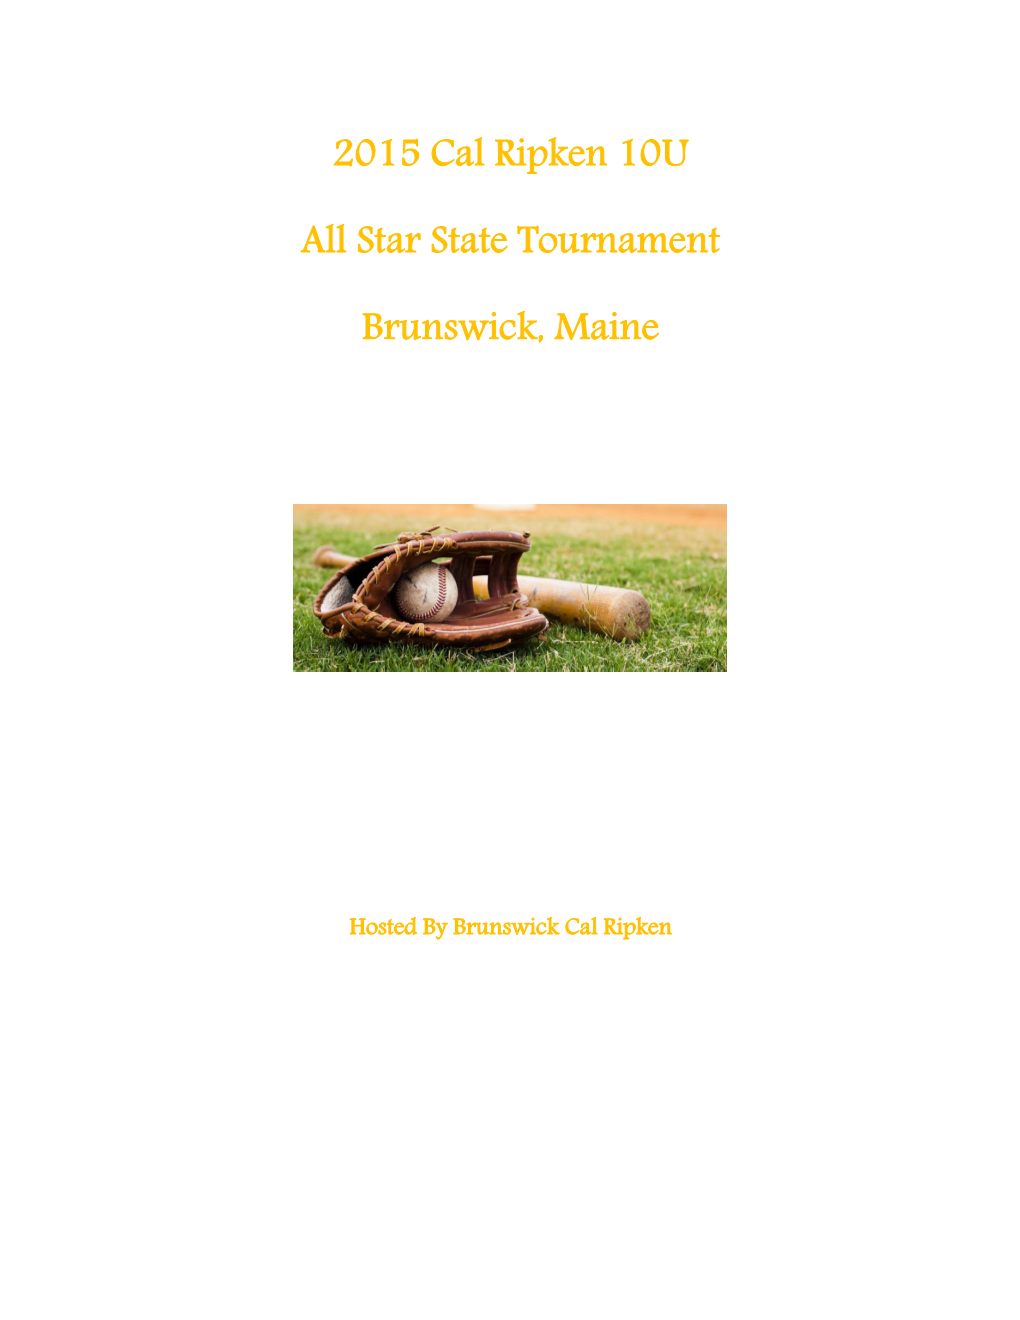 All Star State Tournament